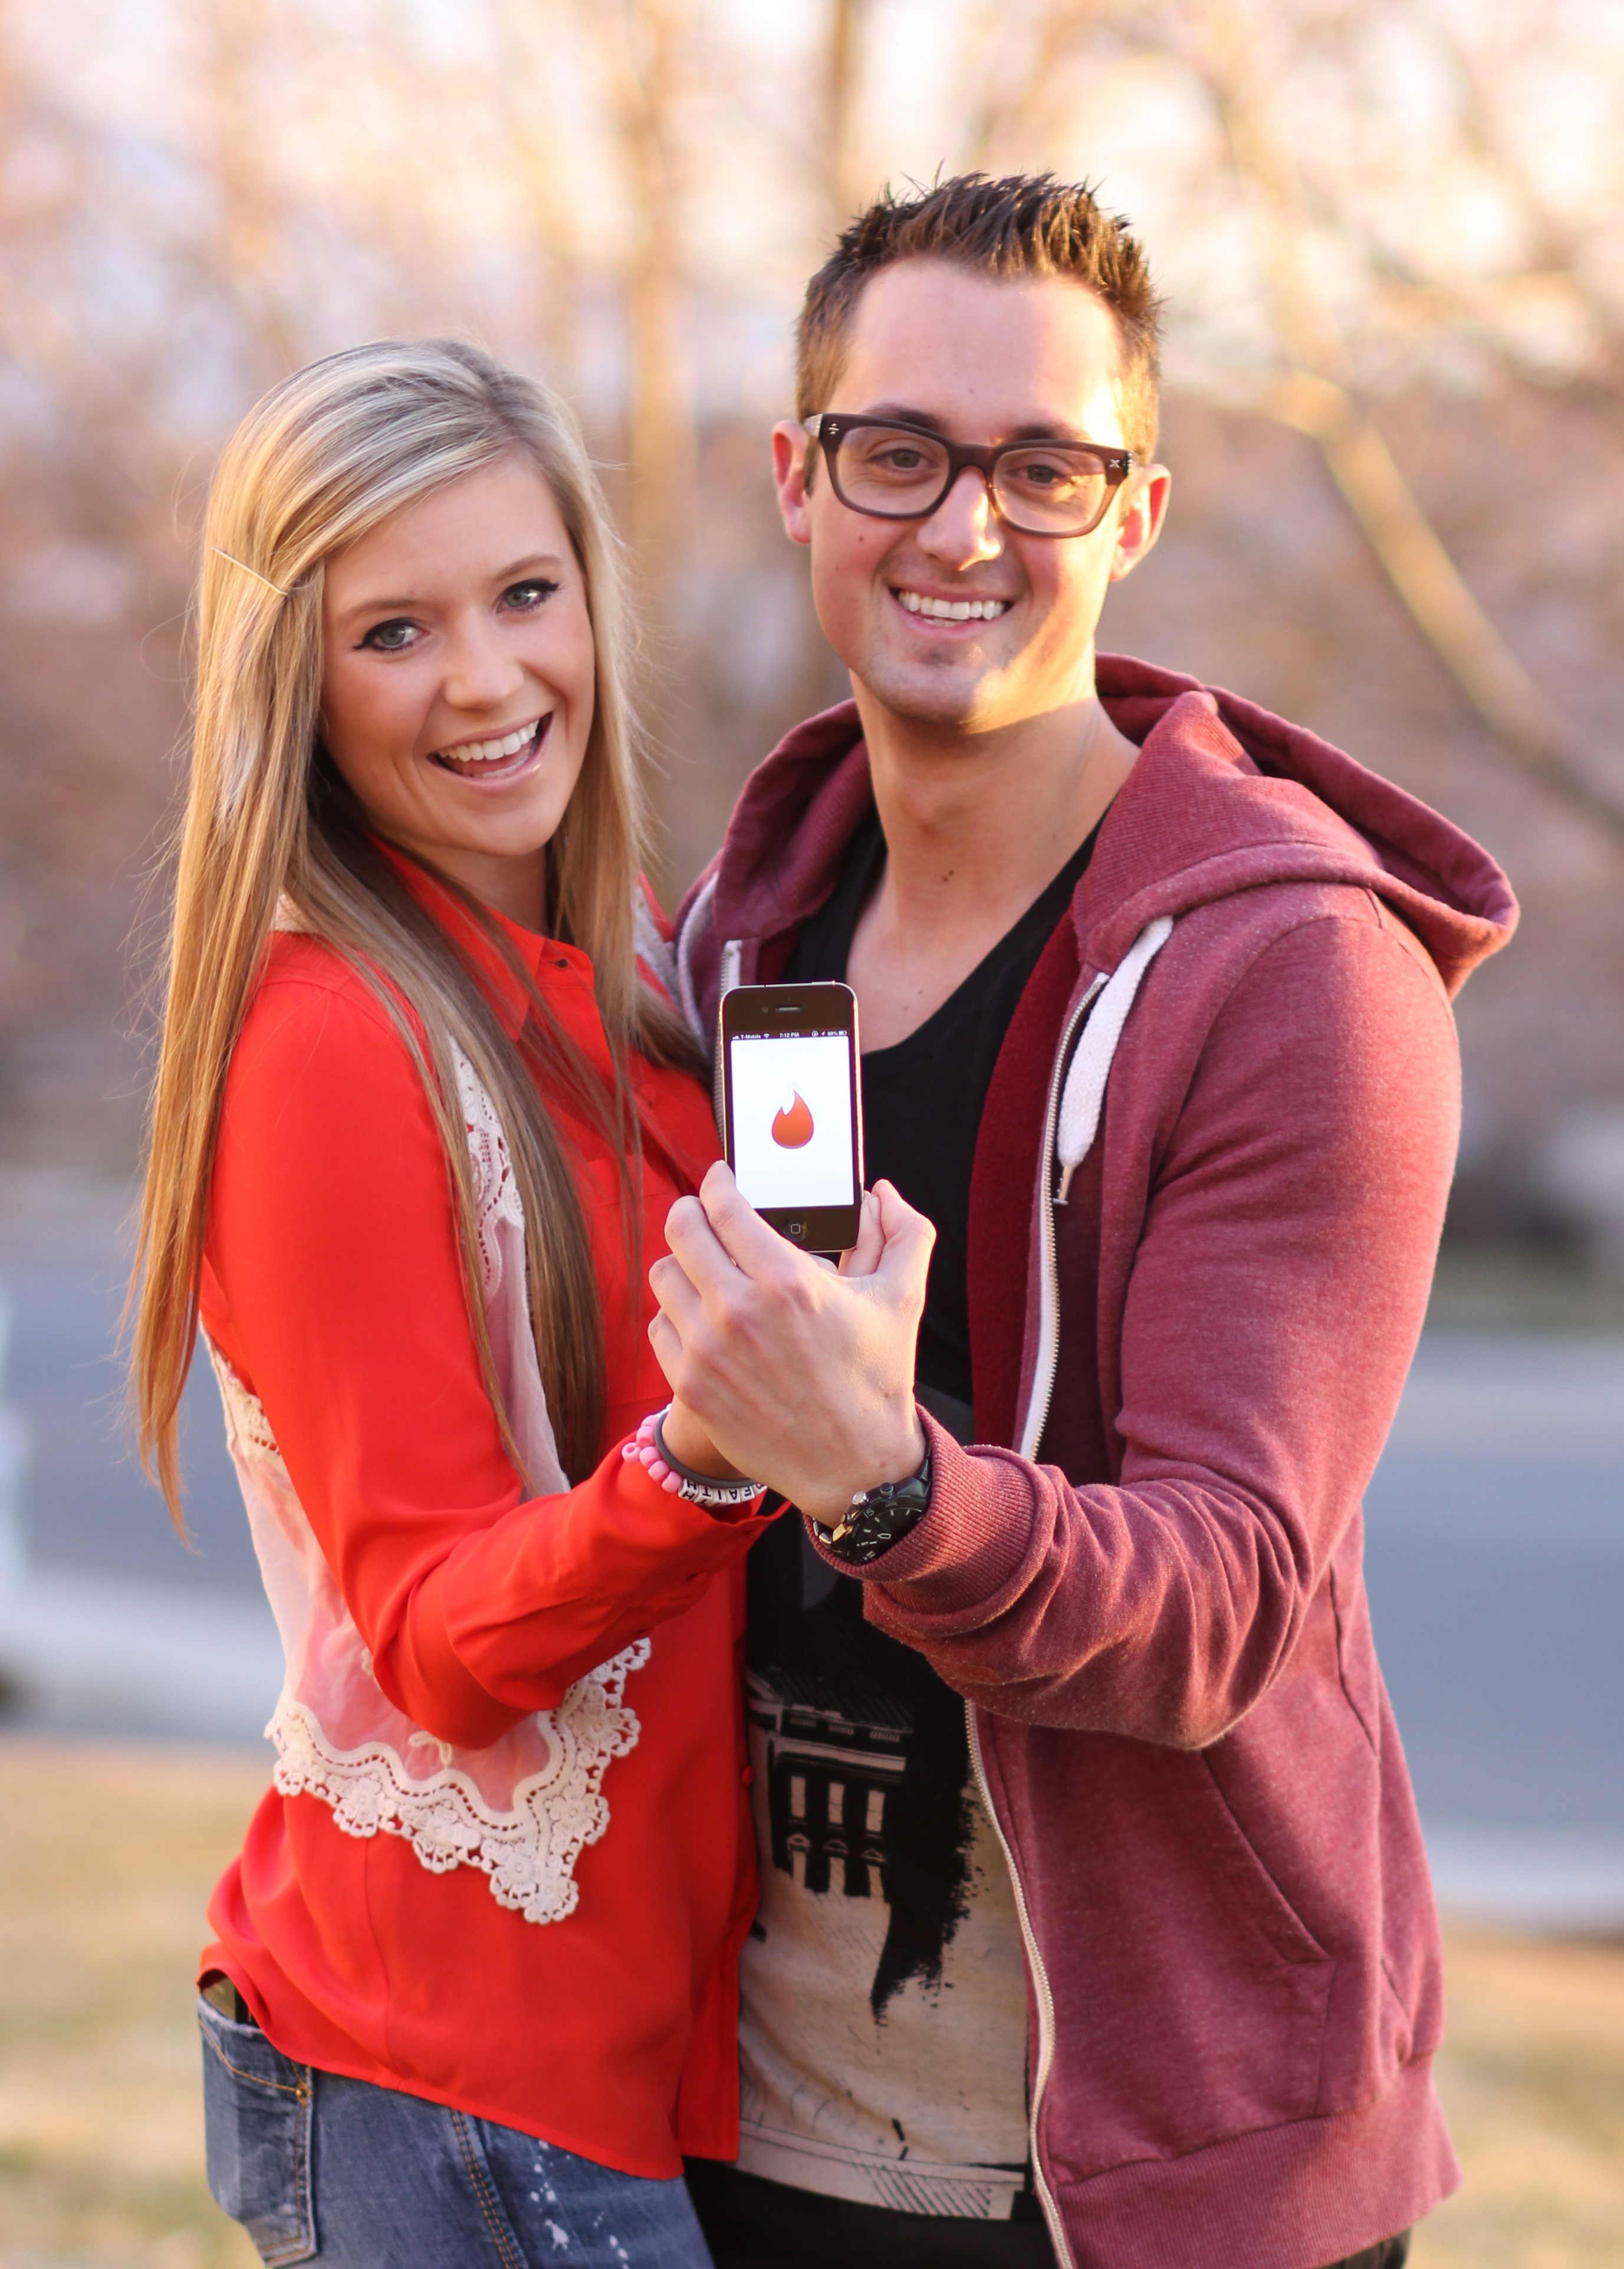 Tinder New Matchmaking App Catches Fire In The Provo Dating Scene